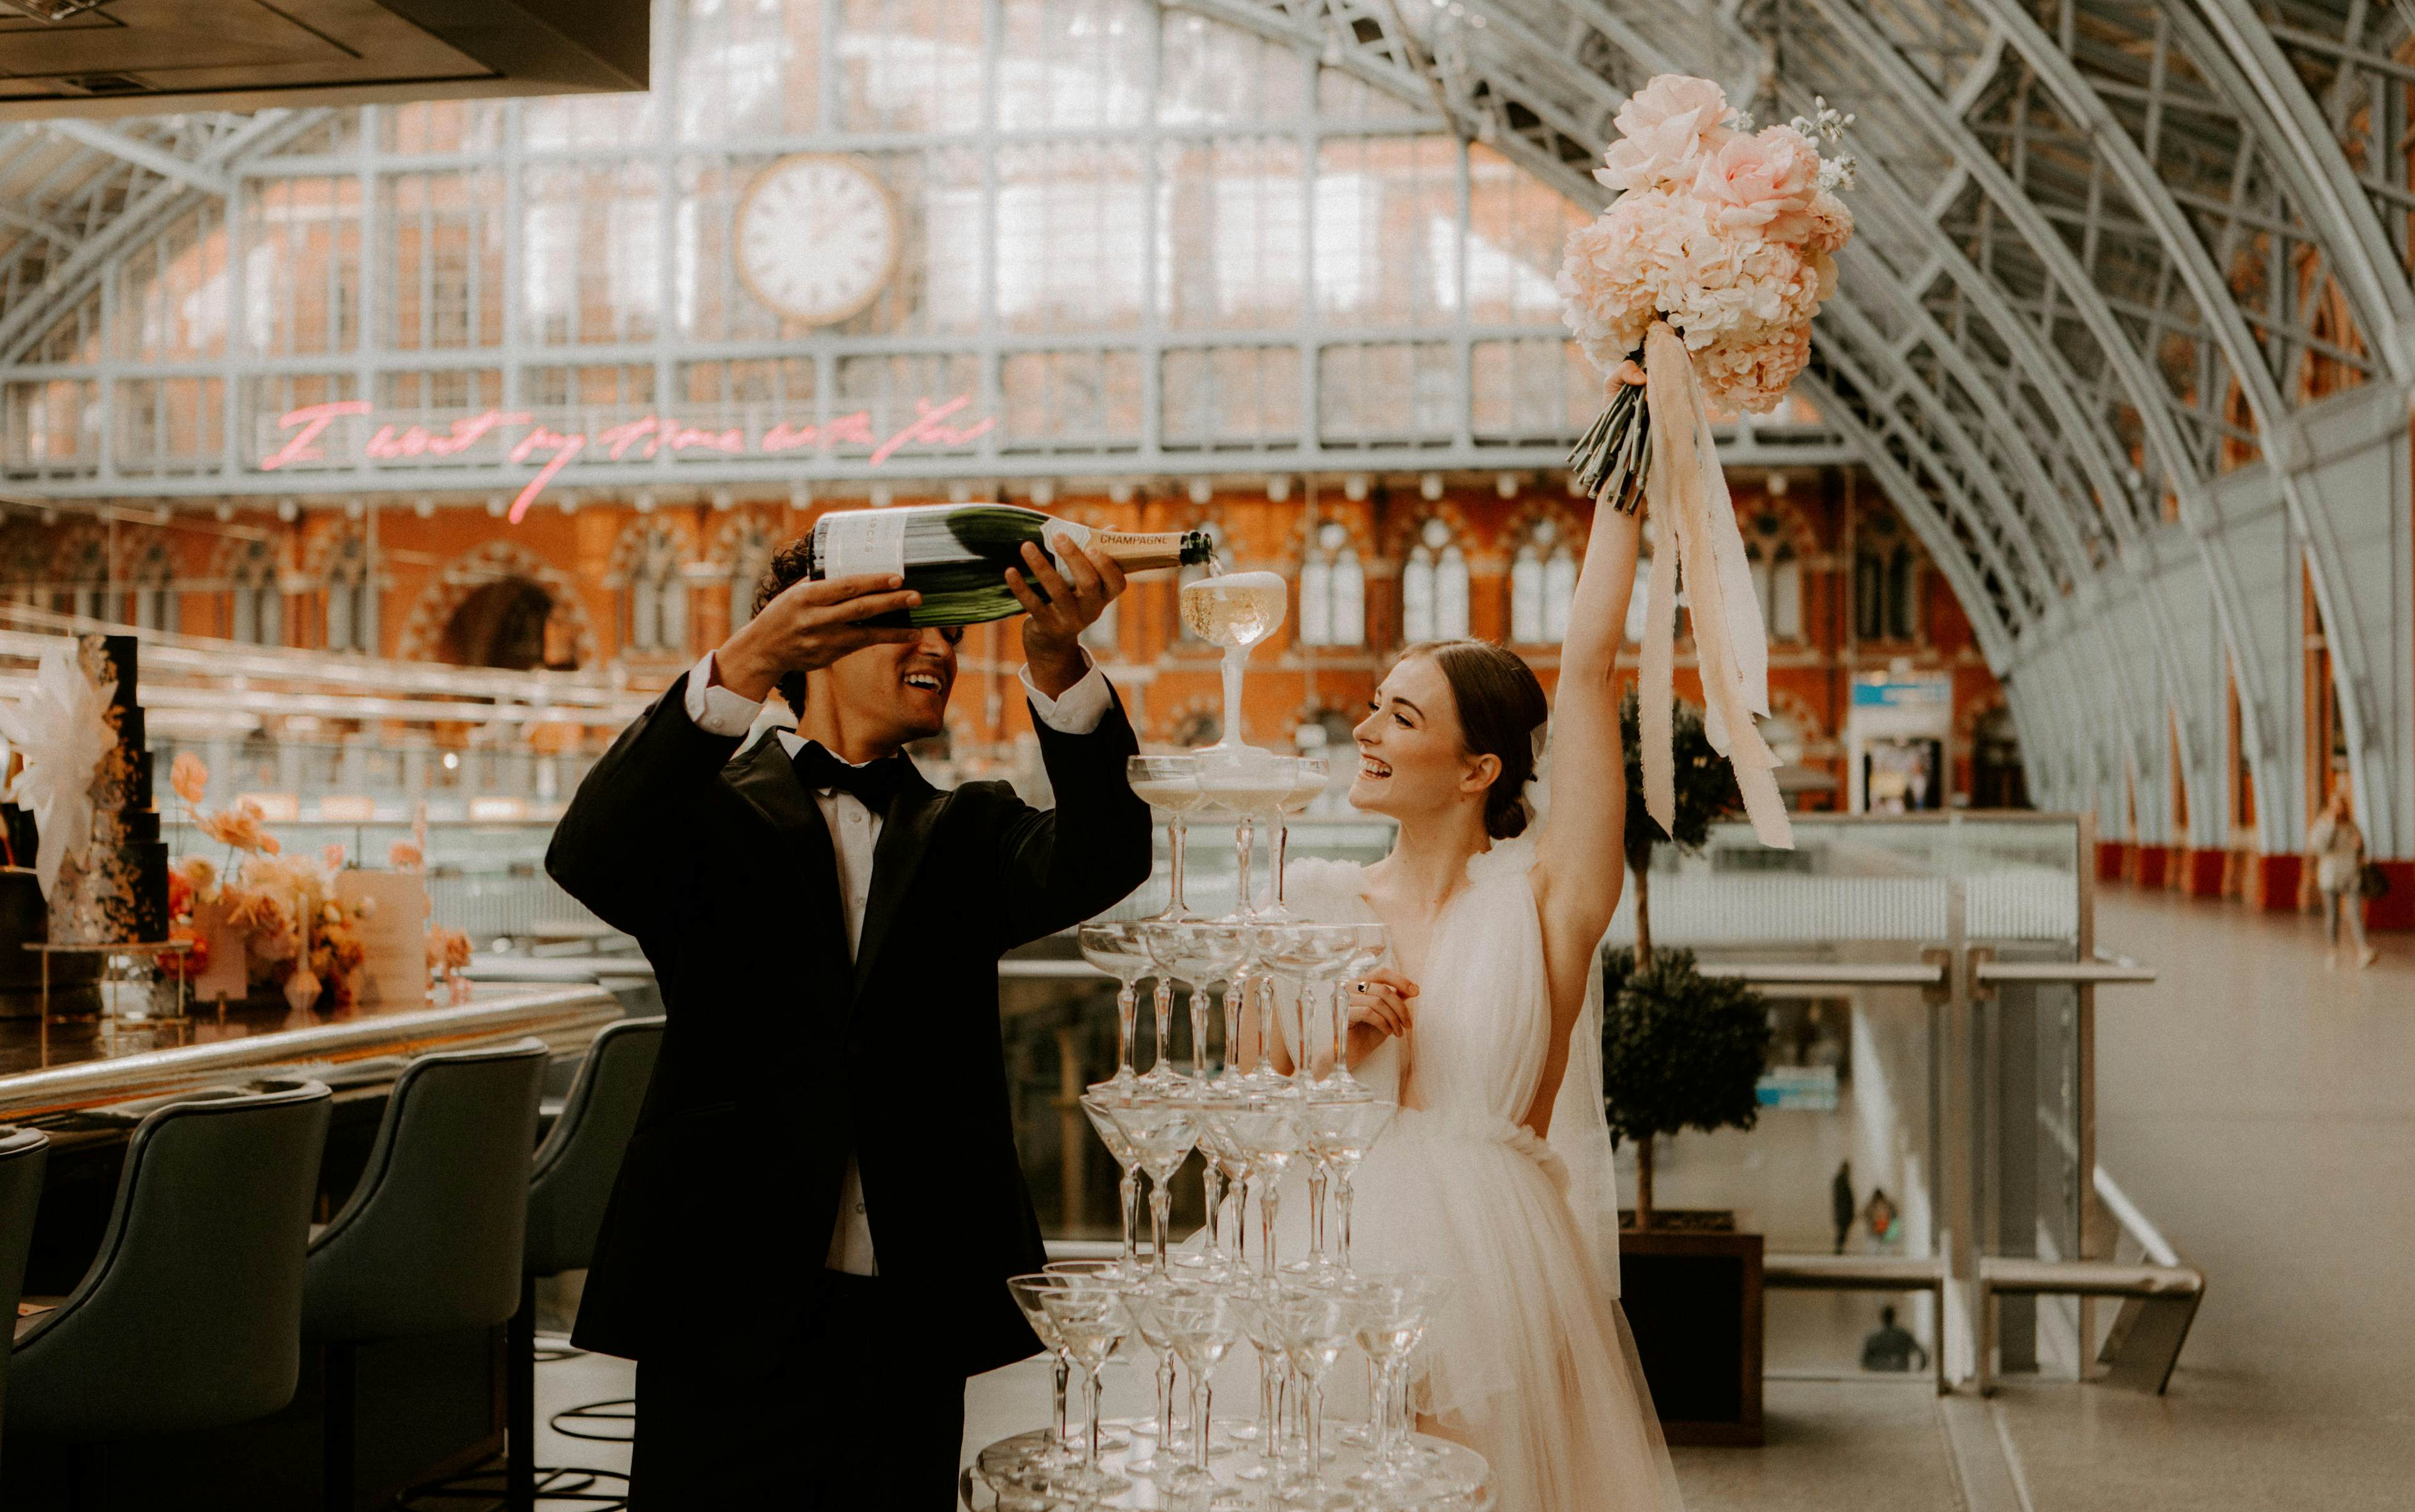 St Pancras Brasserie and Champagne Bar by Searcys  - Weddings image 1